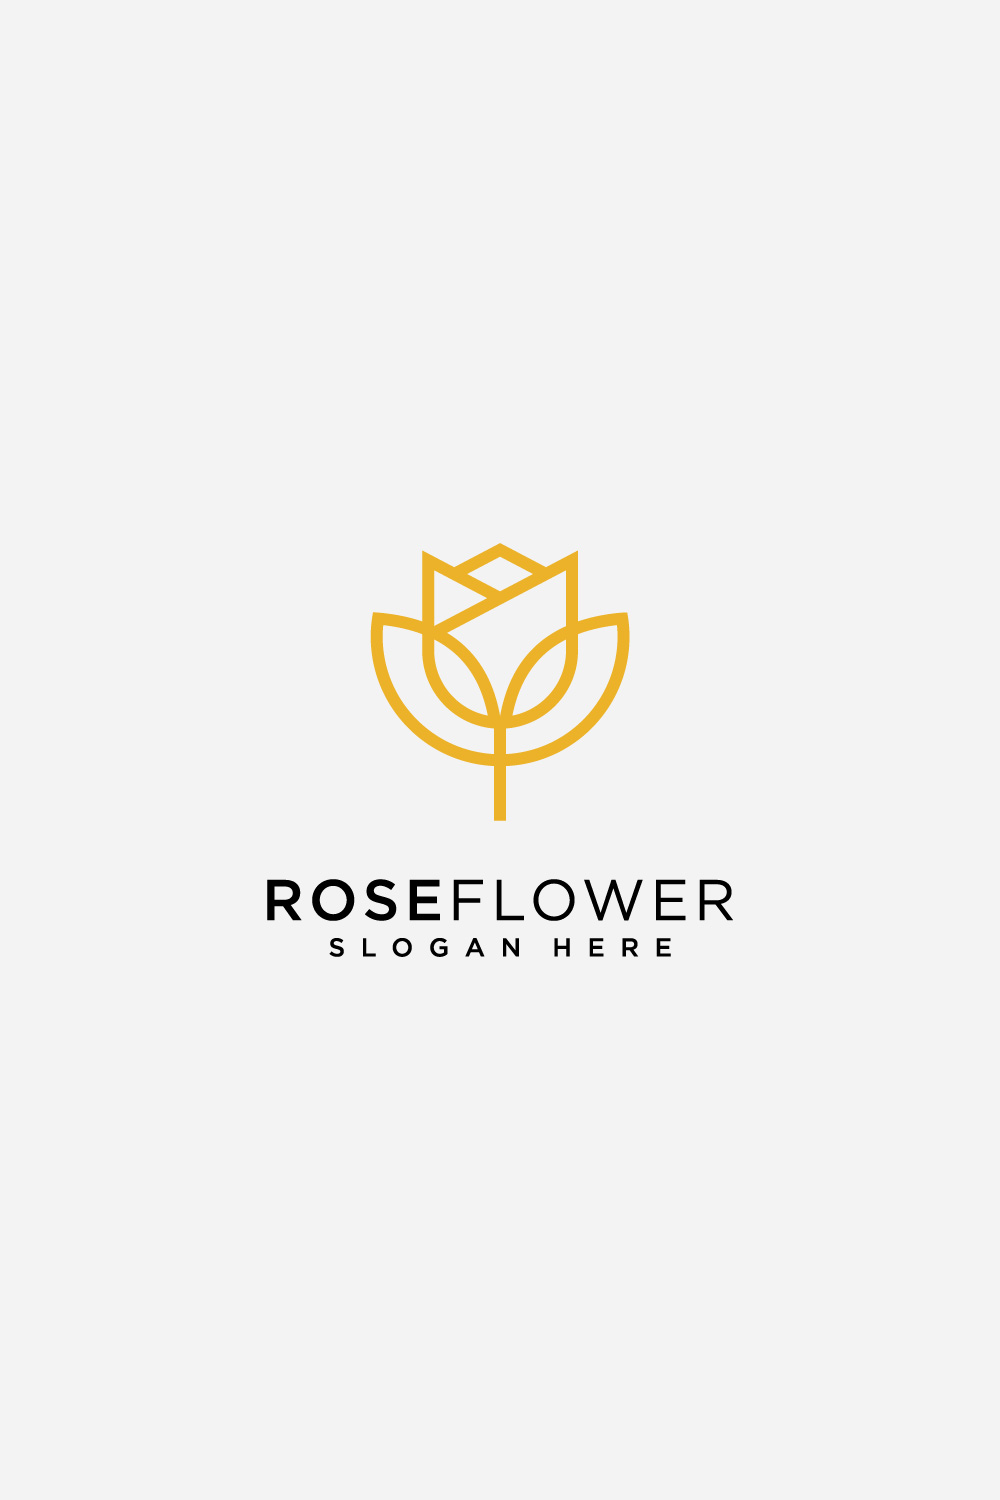 Roses Logo Vector Template Download on Pngtree